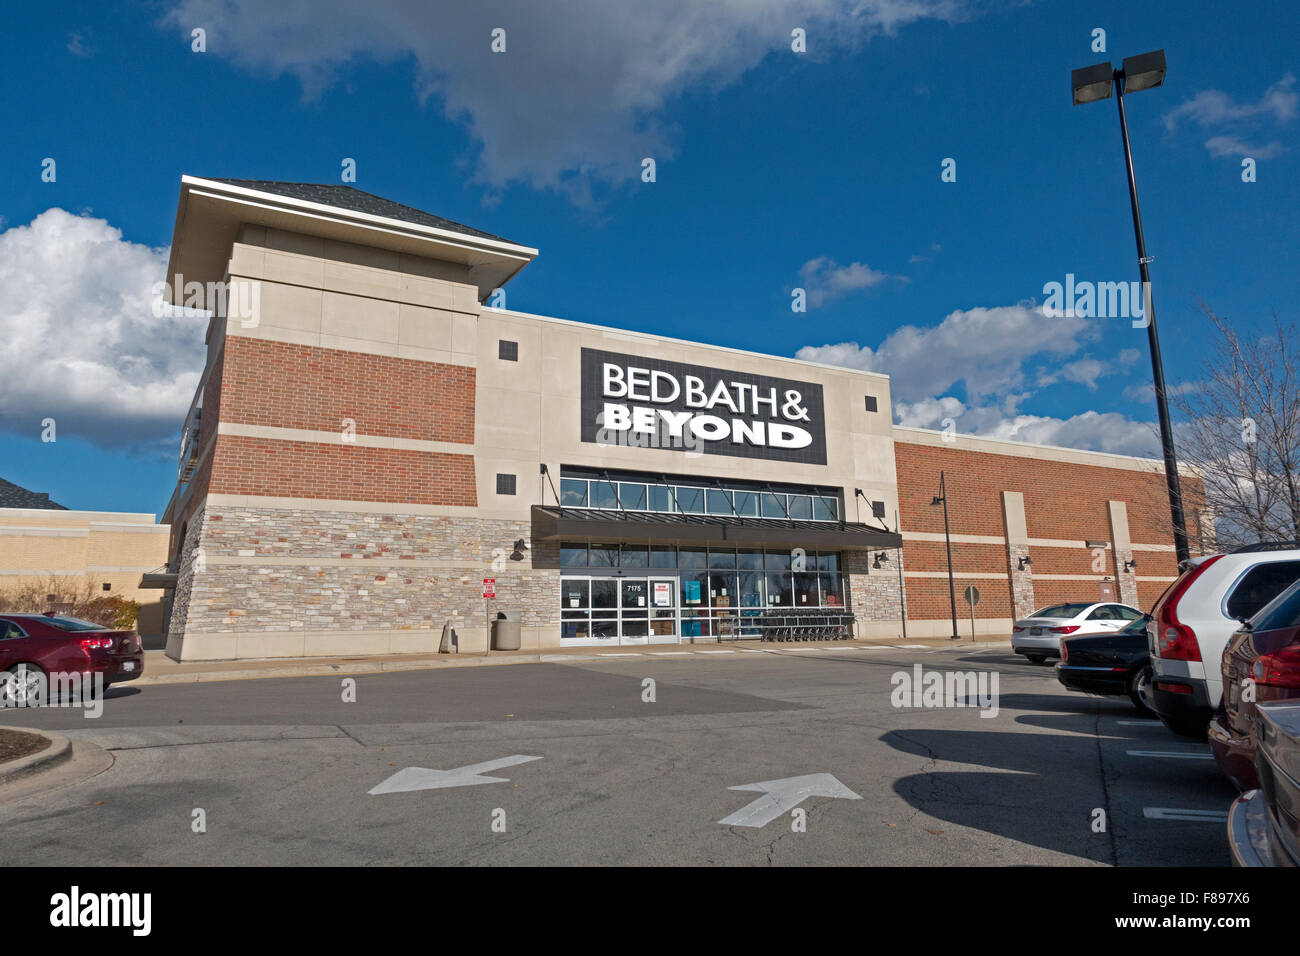 Bed Bath & Beyond building exterior with beautiful blue sky. Willowbrook Illinois IL USA Stock Photo